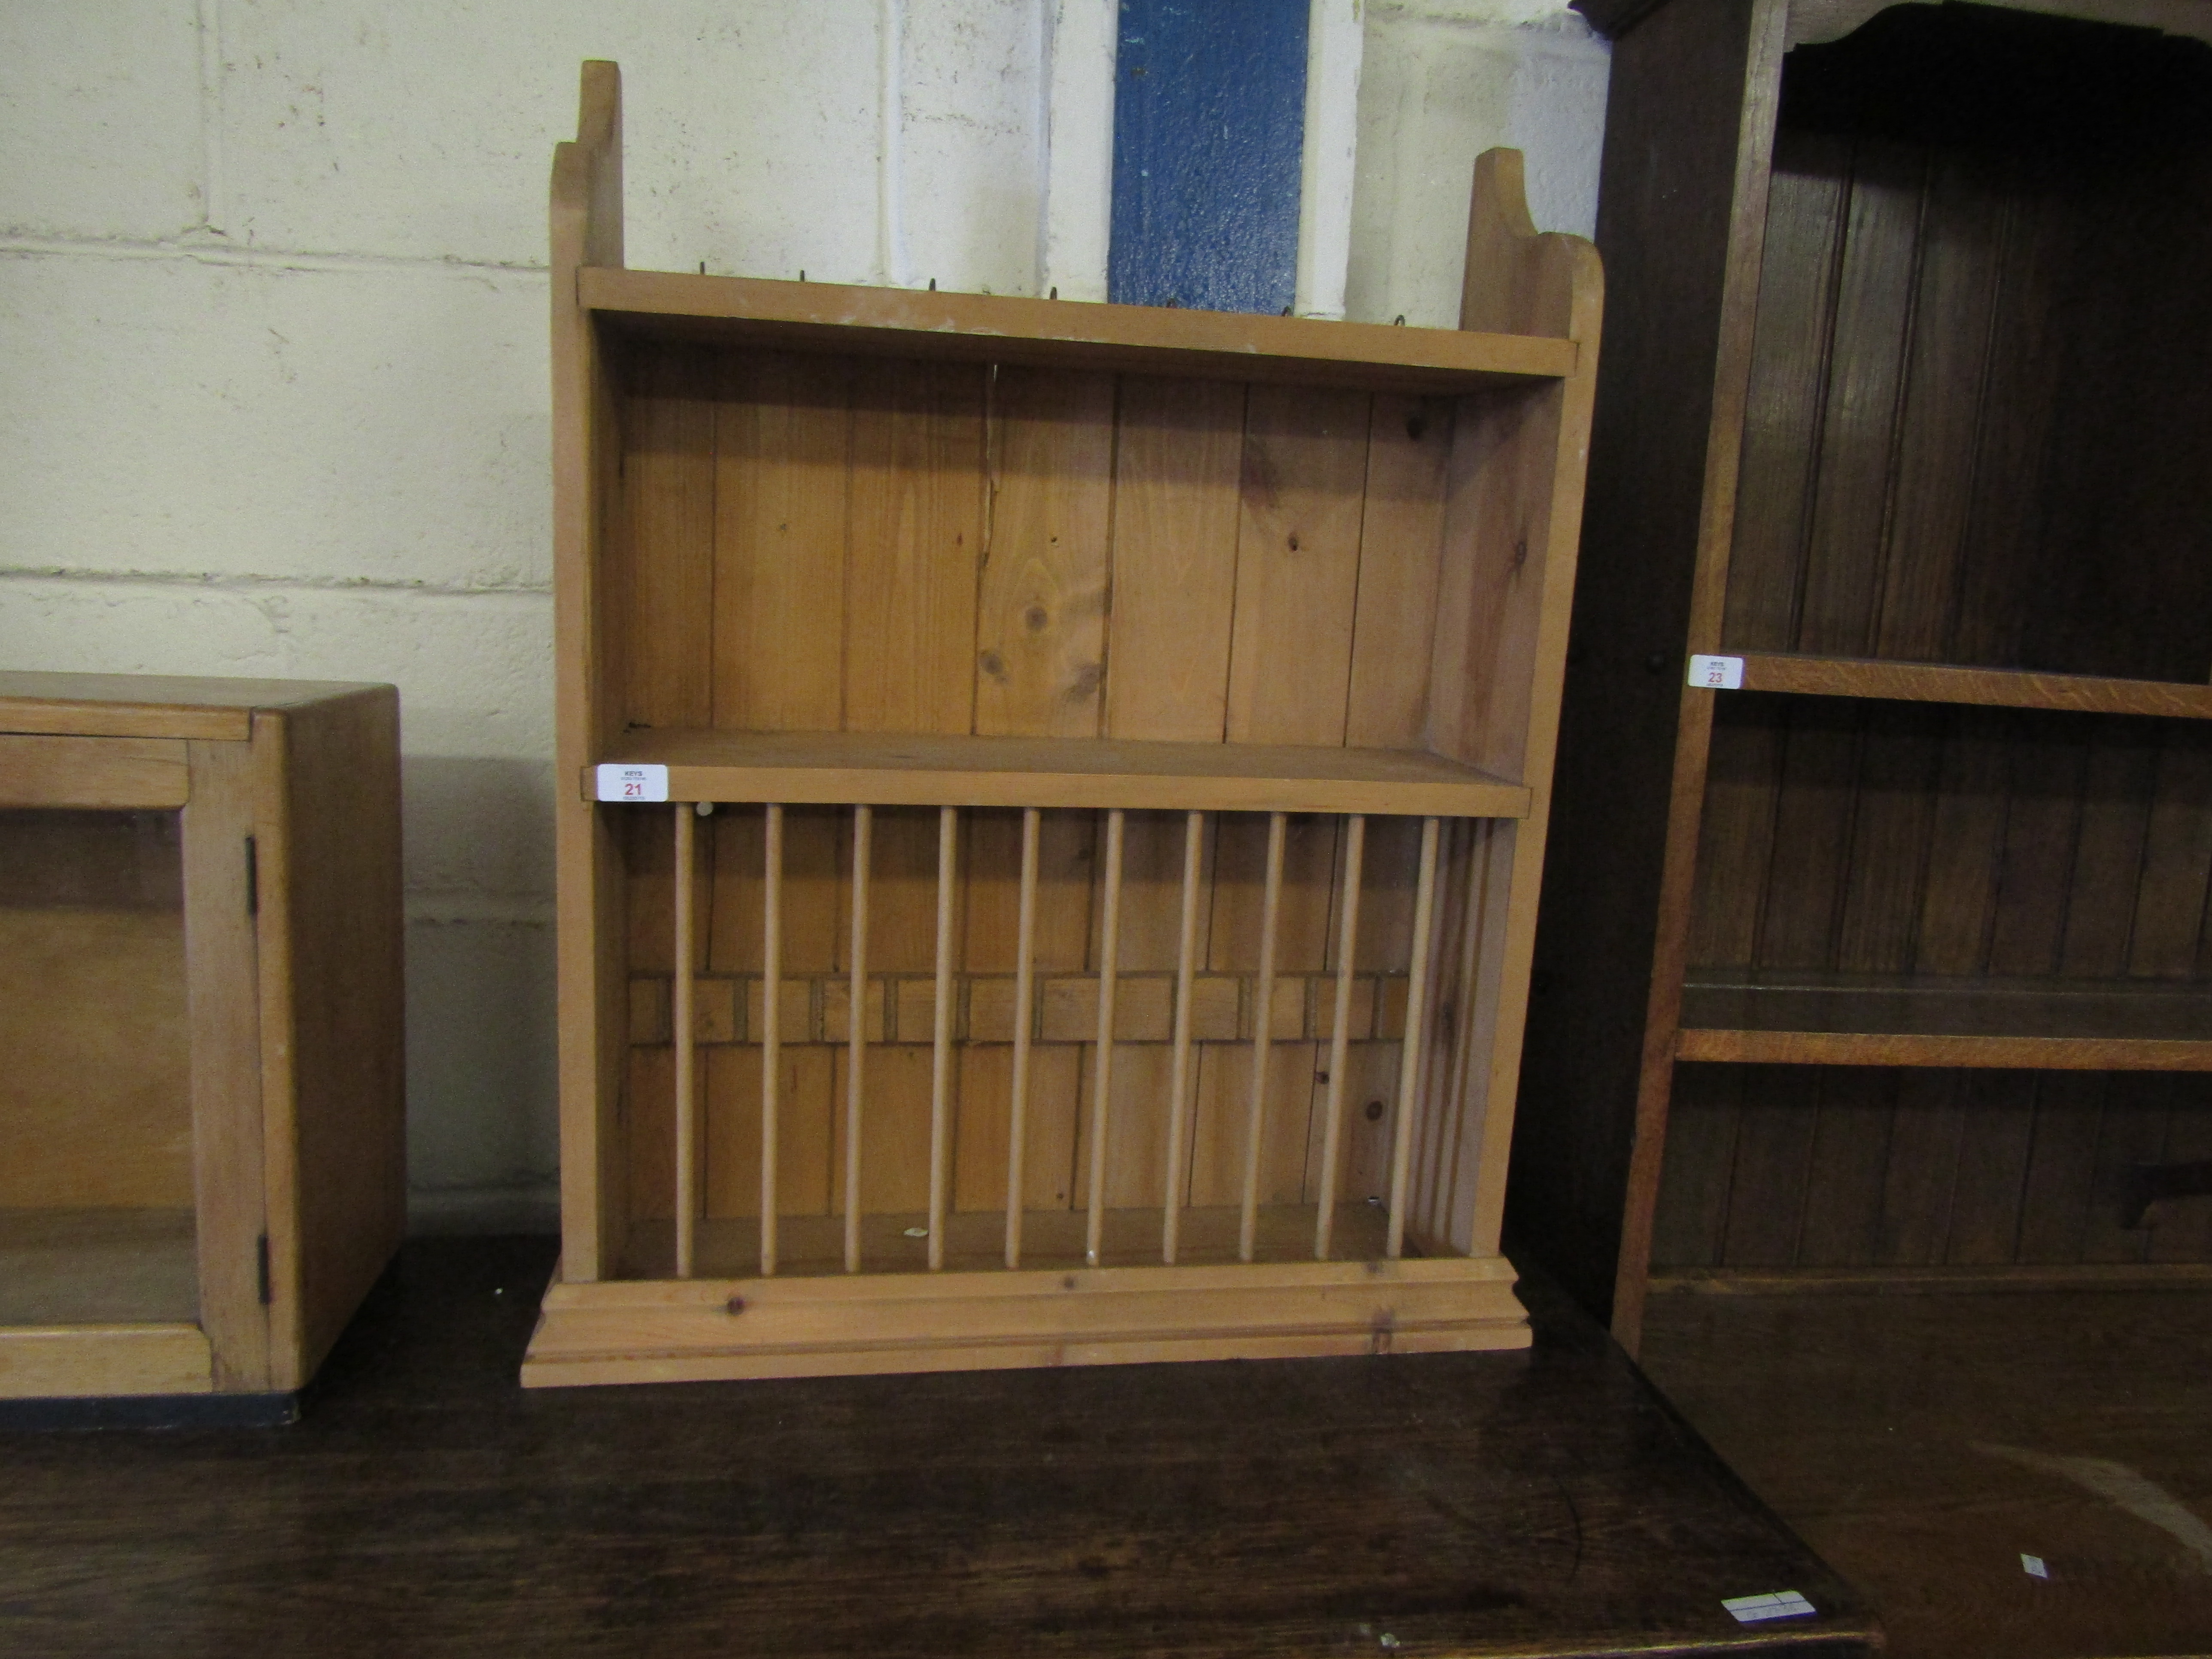 WALL MOUNTED PINE FRAMED PLATE RACK WITH OPEN SHELF